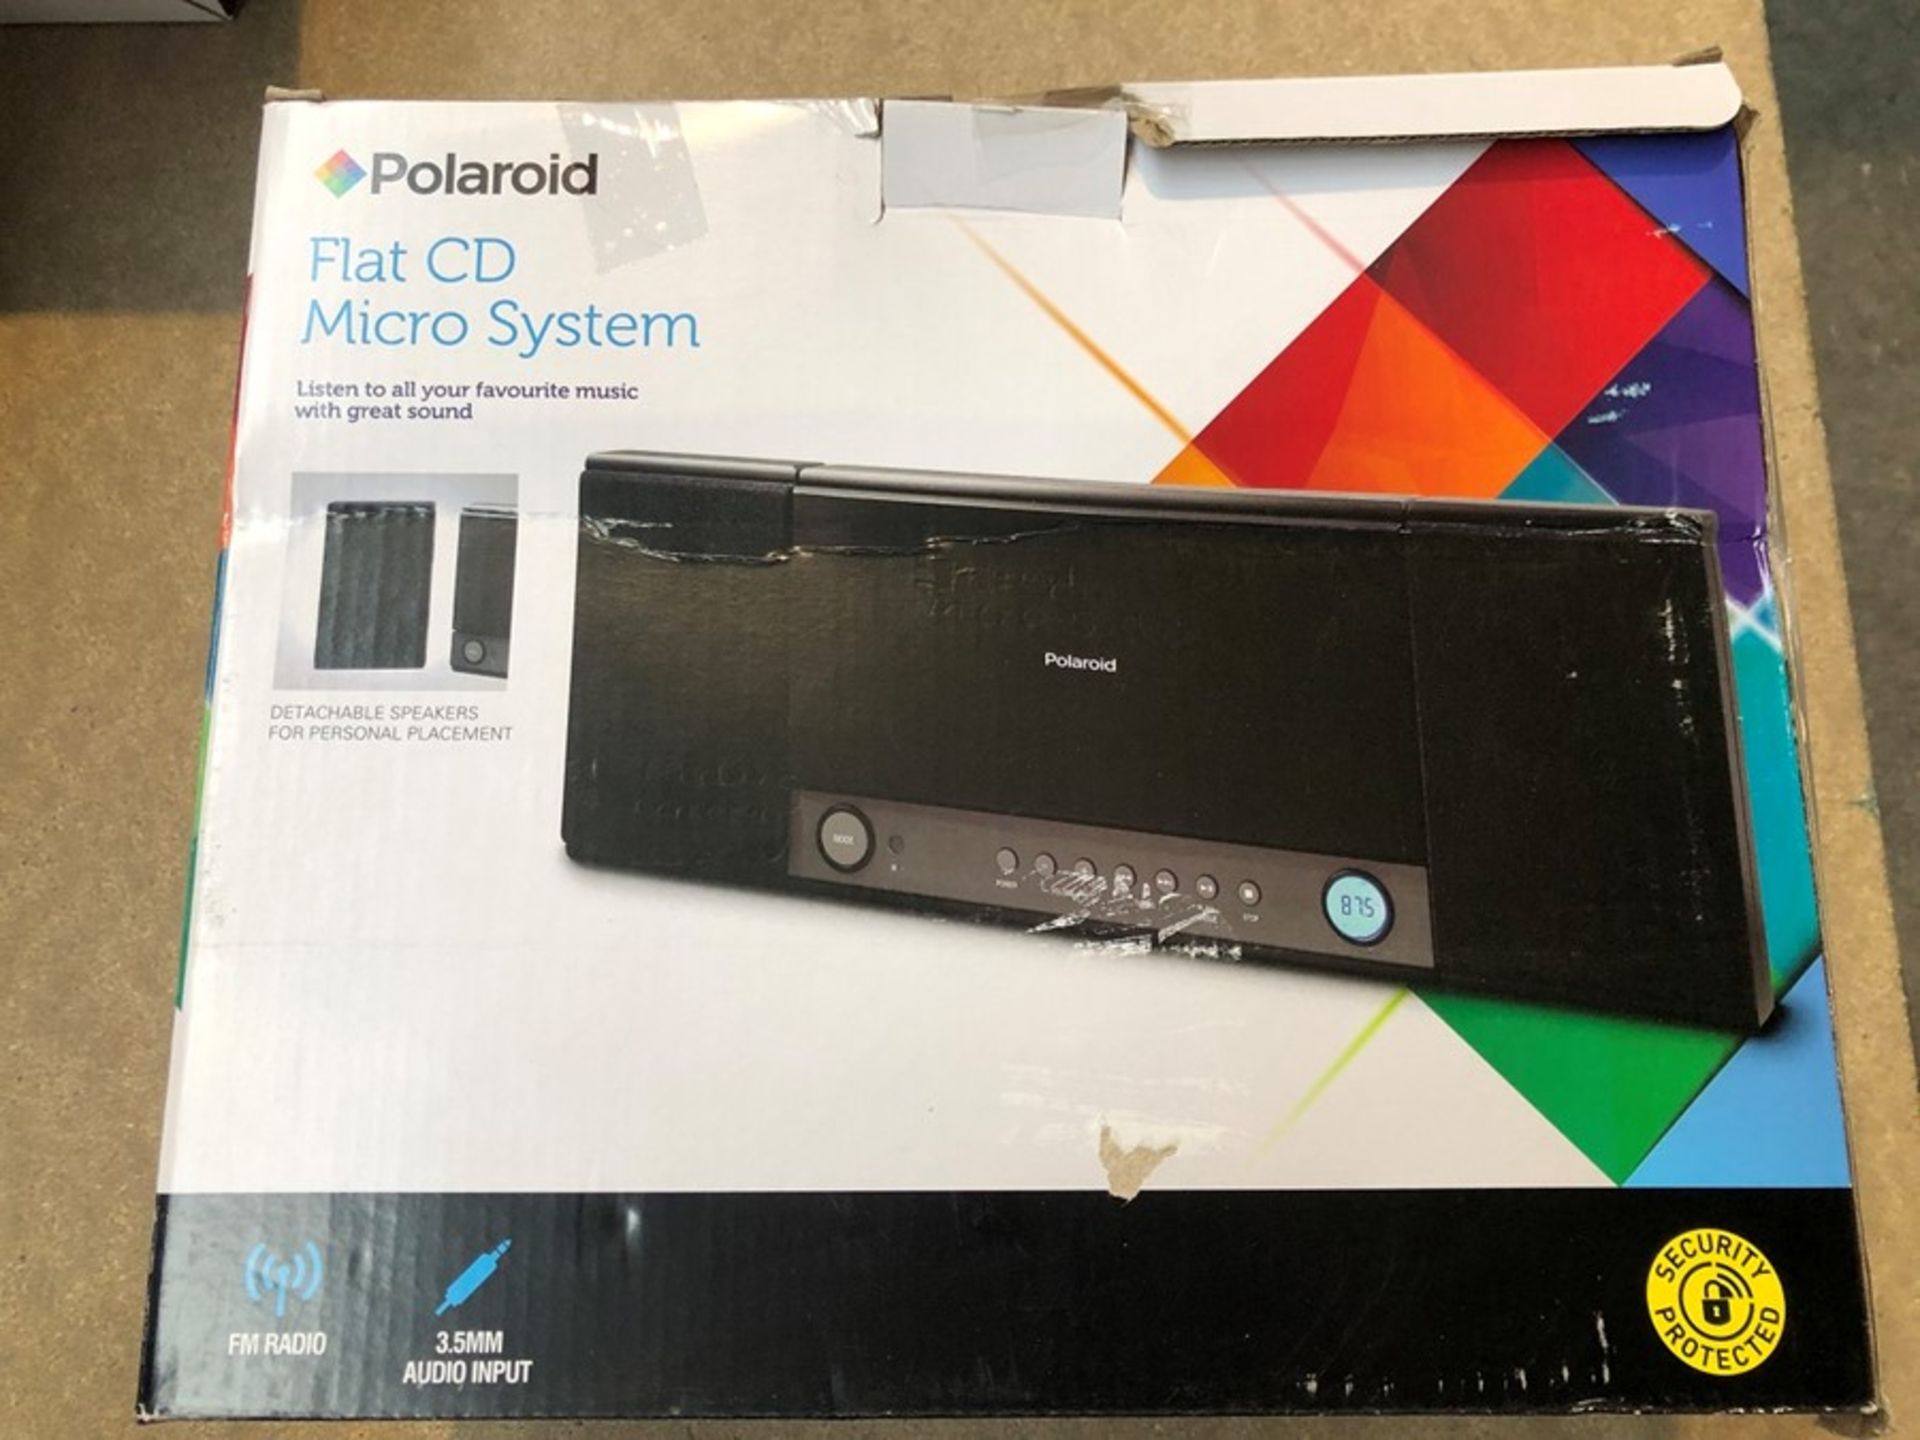 1 BOXED POLAROID FLAT CD MICRO SYSTEM IN BLACK / RRP £30.00 - BL -3813 (VIEWING HIGHLY RECOMMENDED)